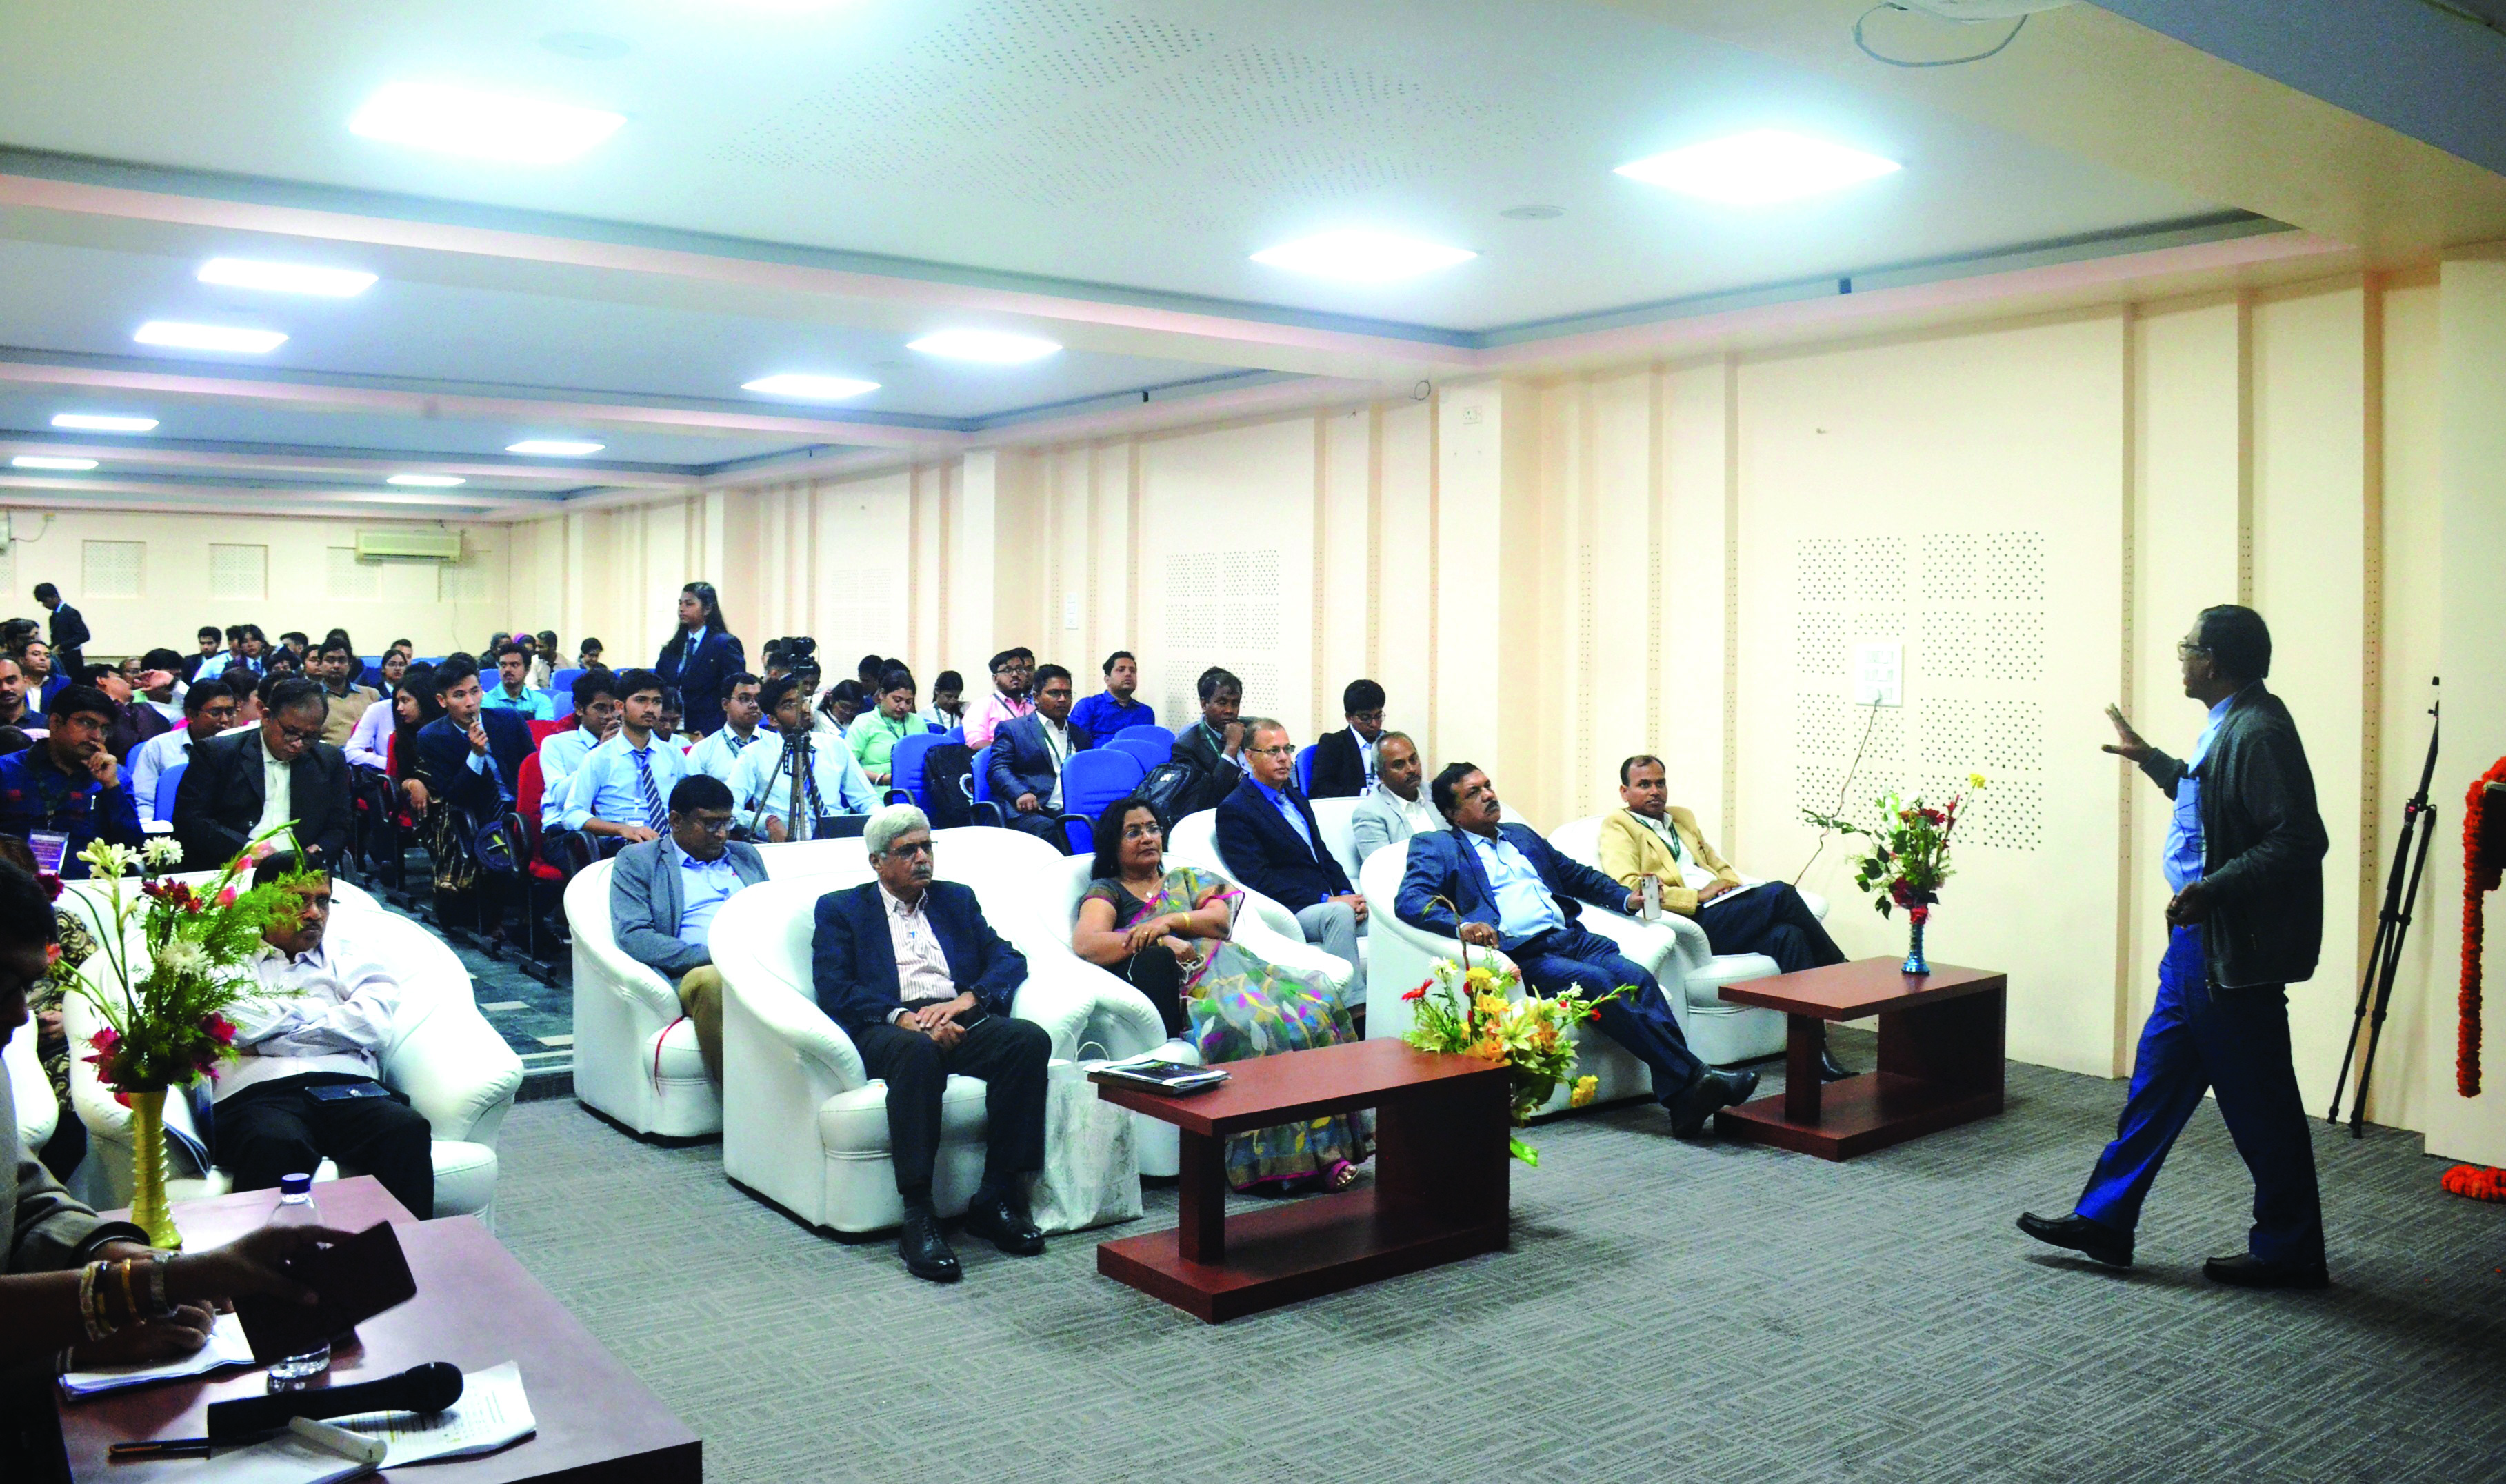 Conference on computer science, communication & technology flagged off